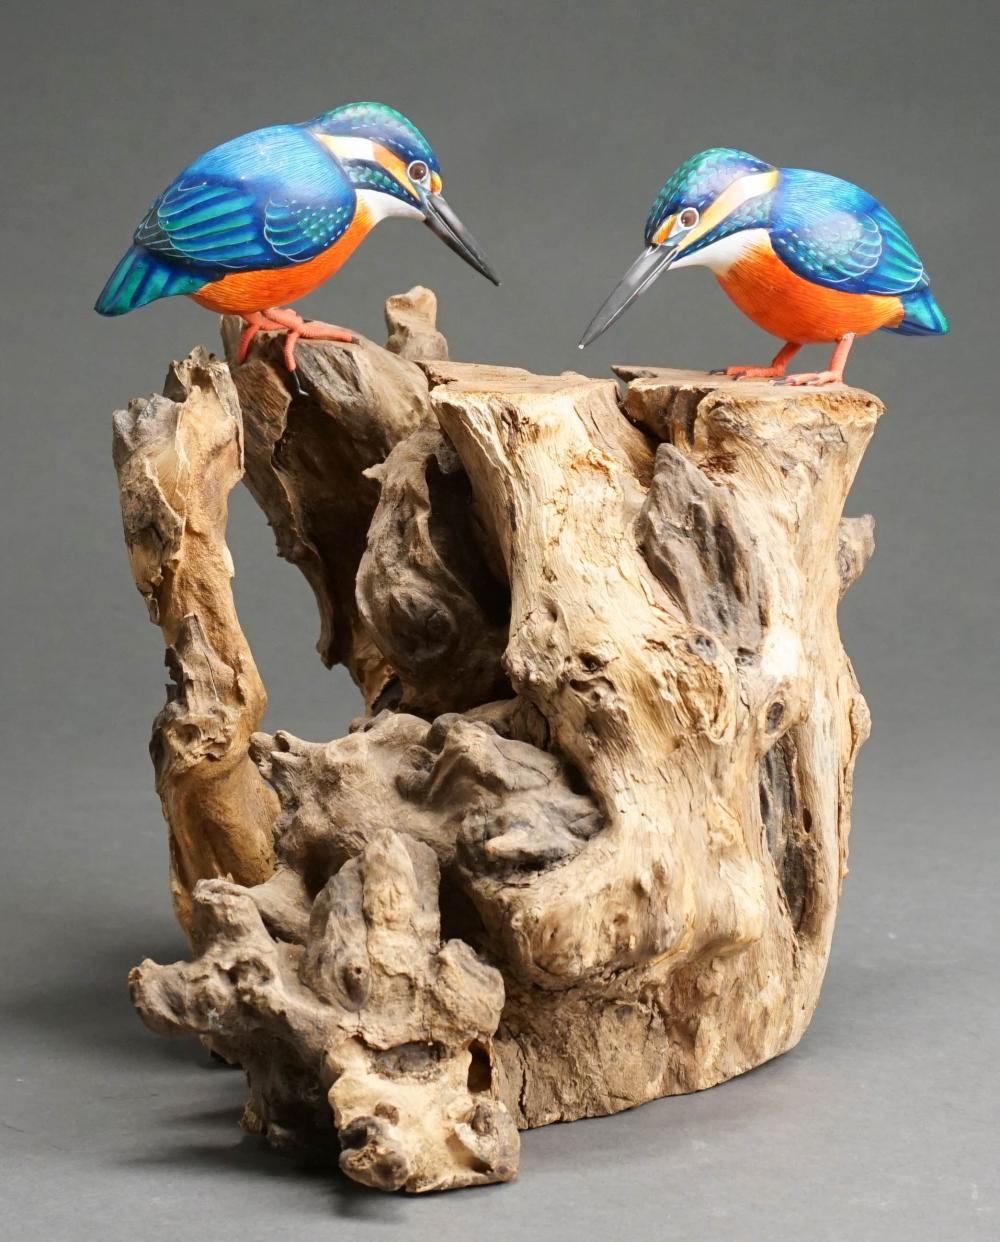 DRIFTWOOD SCULPTURE WITH PERCHED